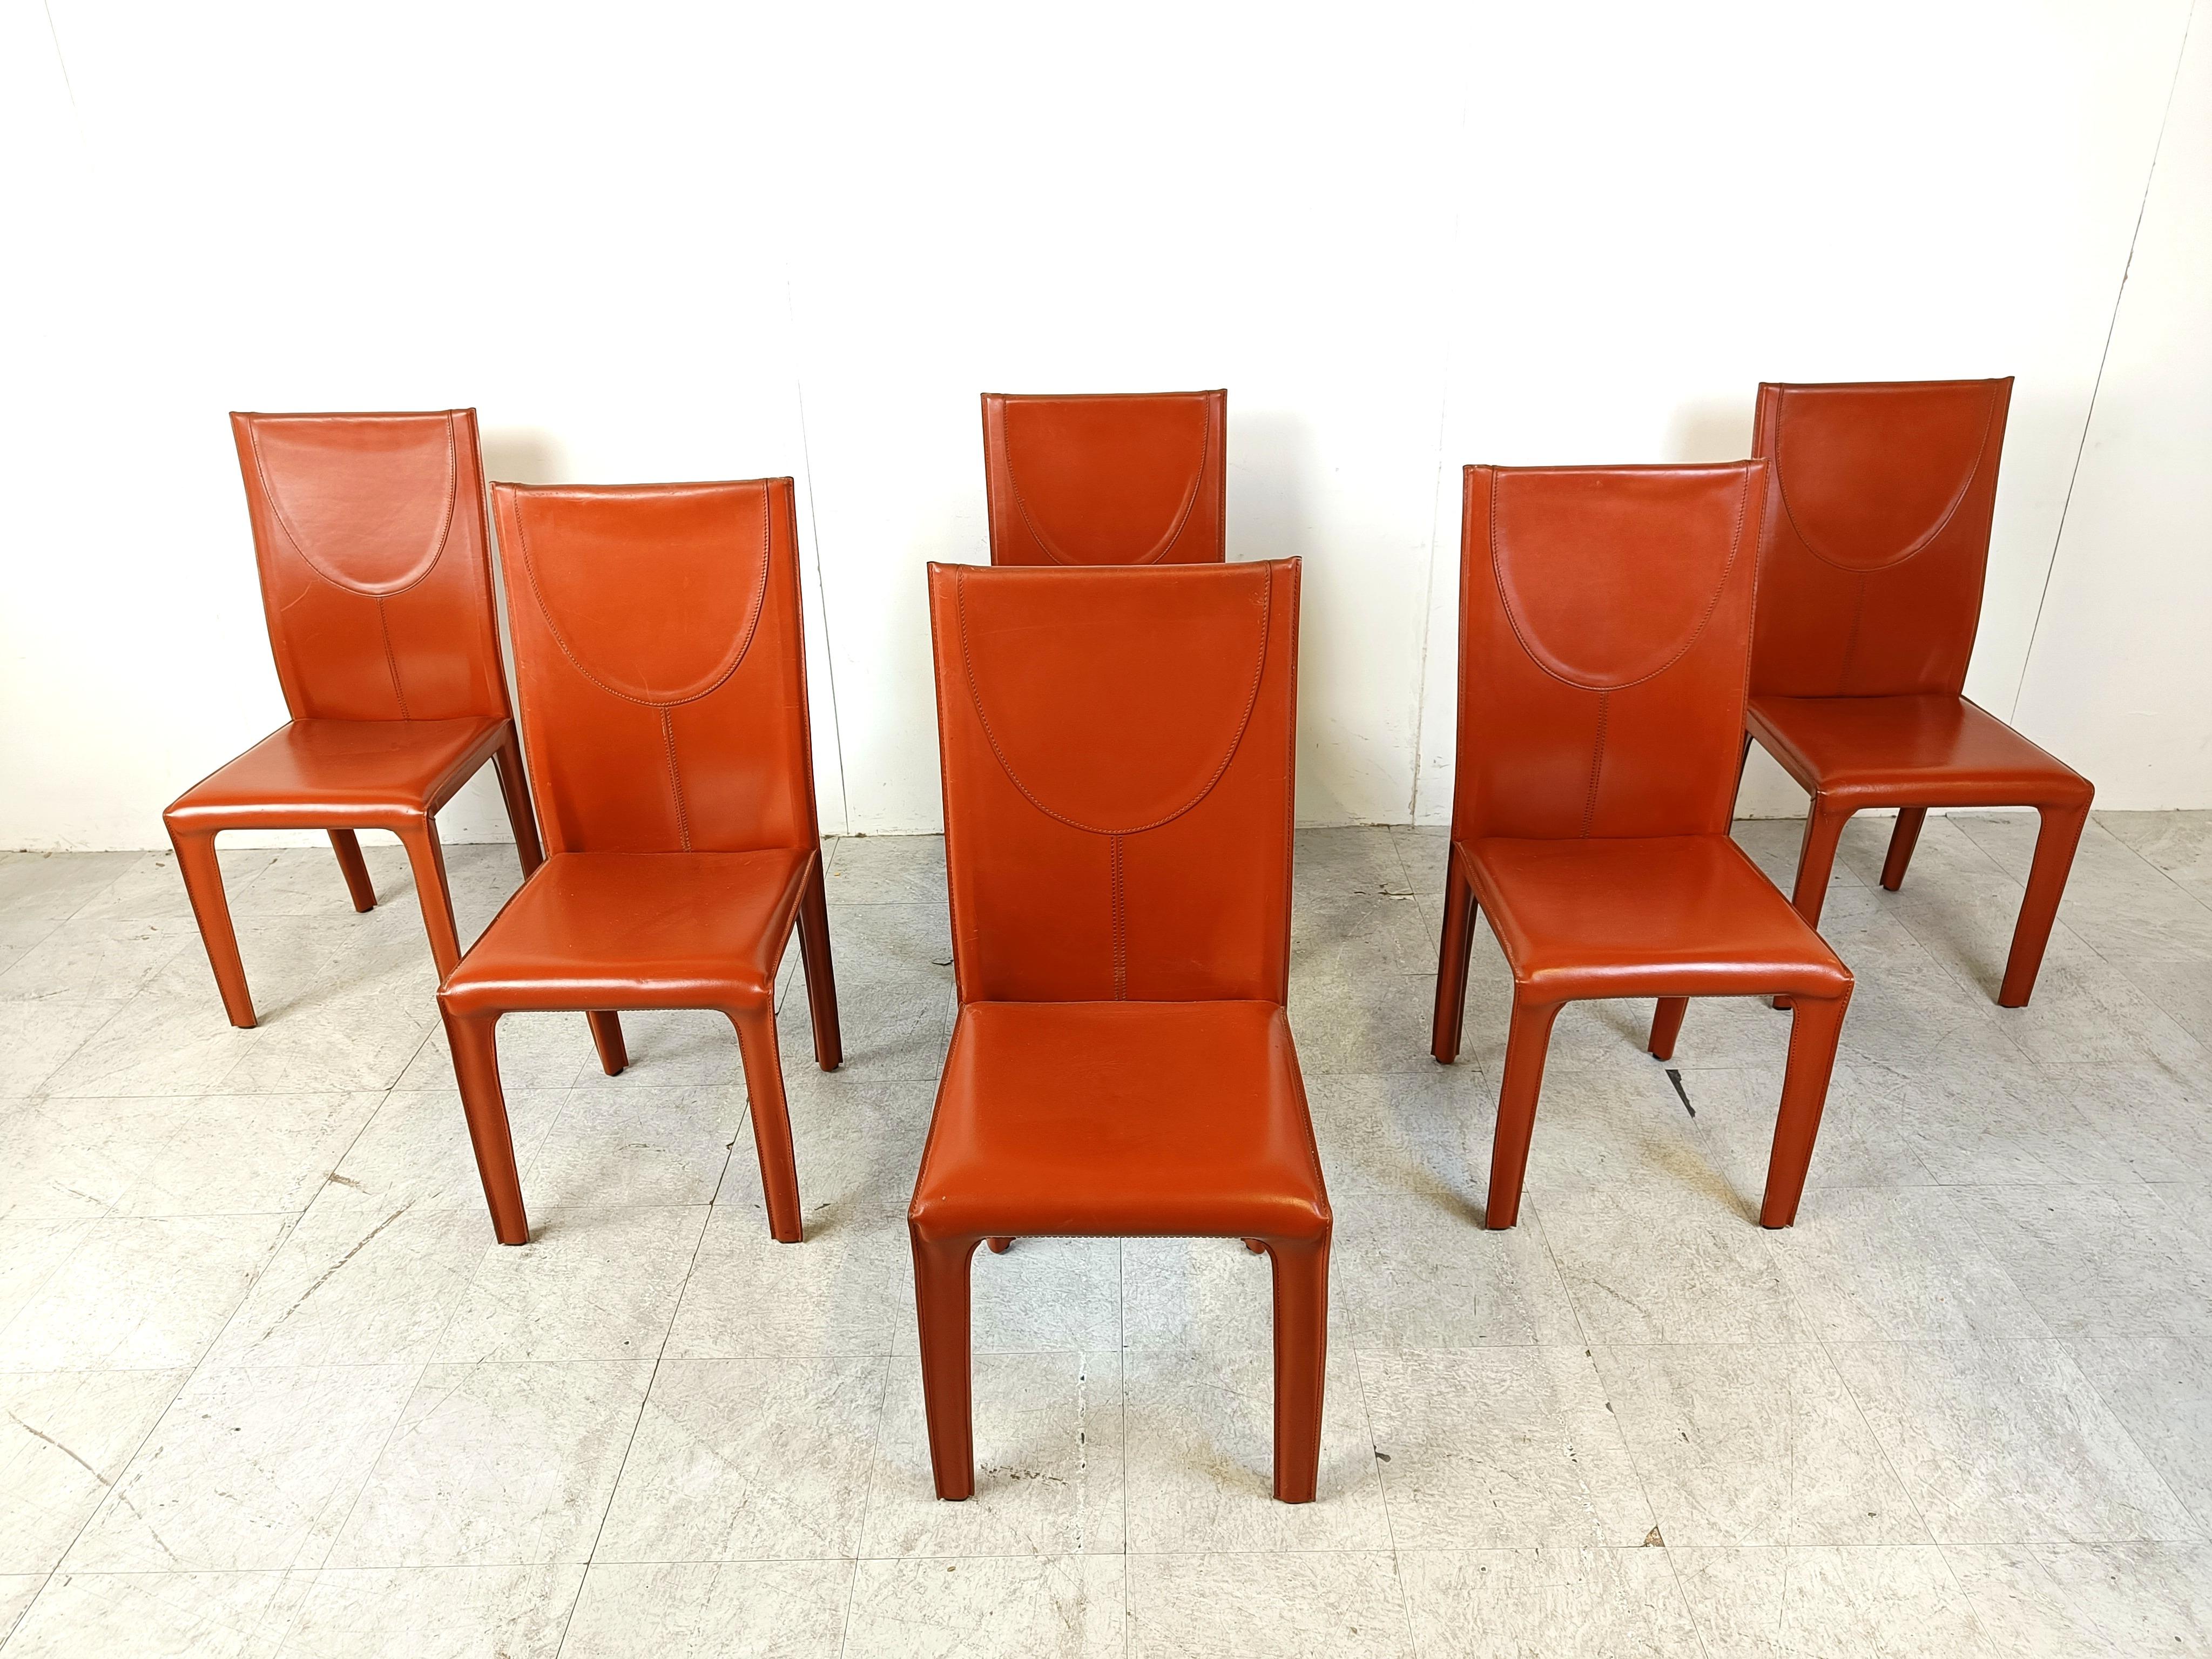 Set of 6 red stiched leather dining chairs by Arper Italy.

Very sturdy and timeless design chairs.

Good condition with normal age related wear

1980s - Italy

Dimensions:
Height: 100cm
Width x depth: 45cm
Seat  height: 45cm

Price is for the